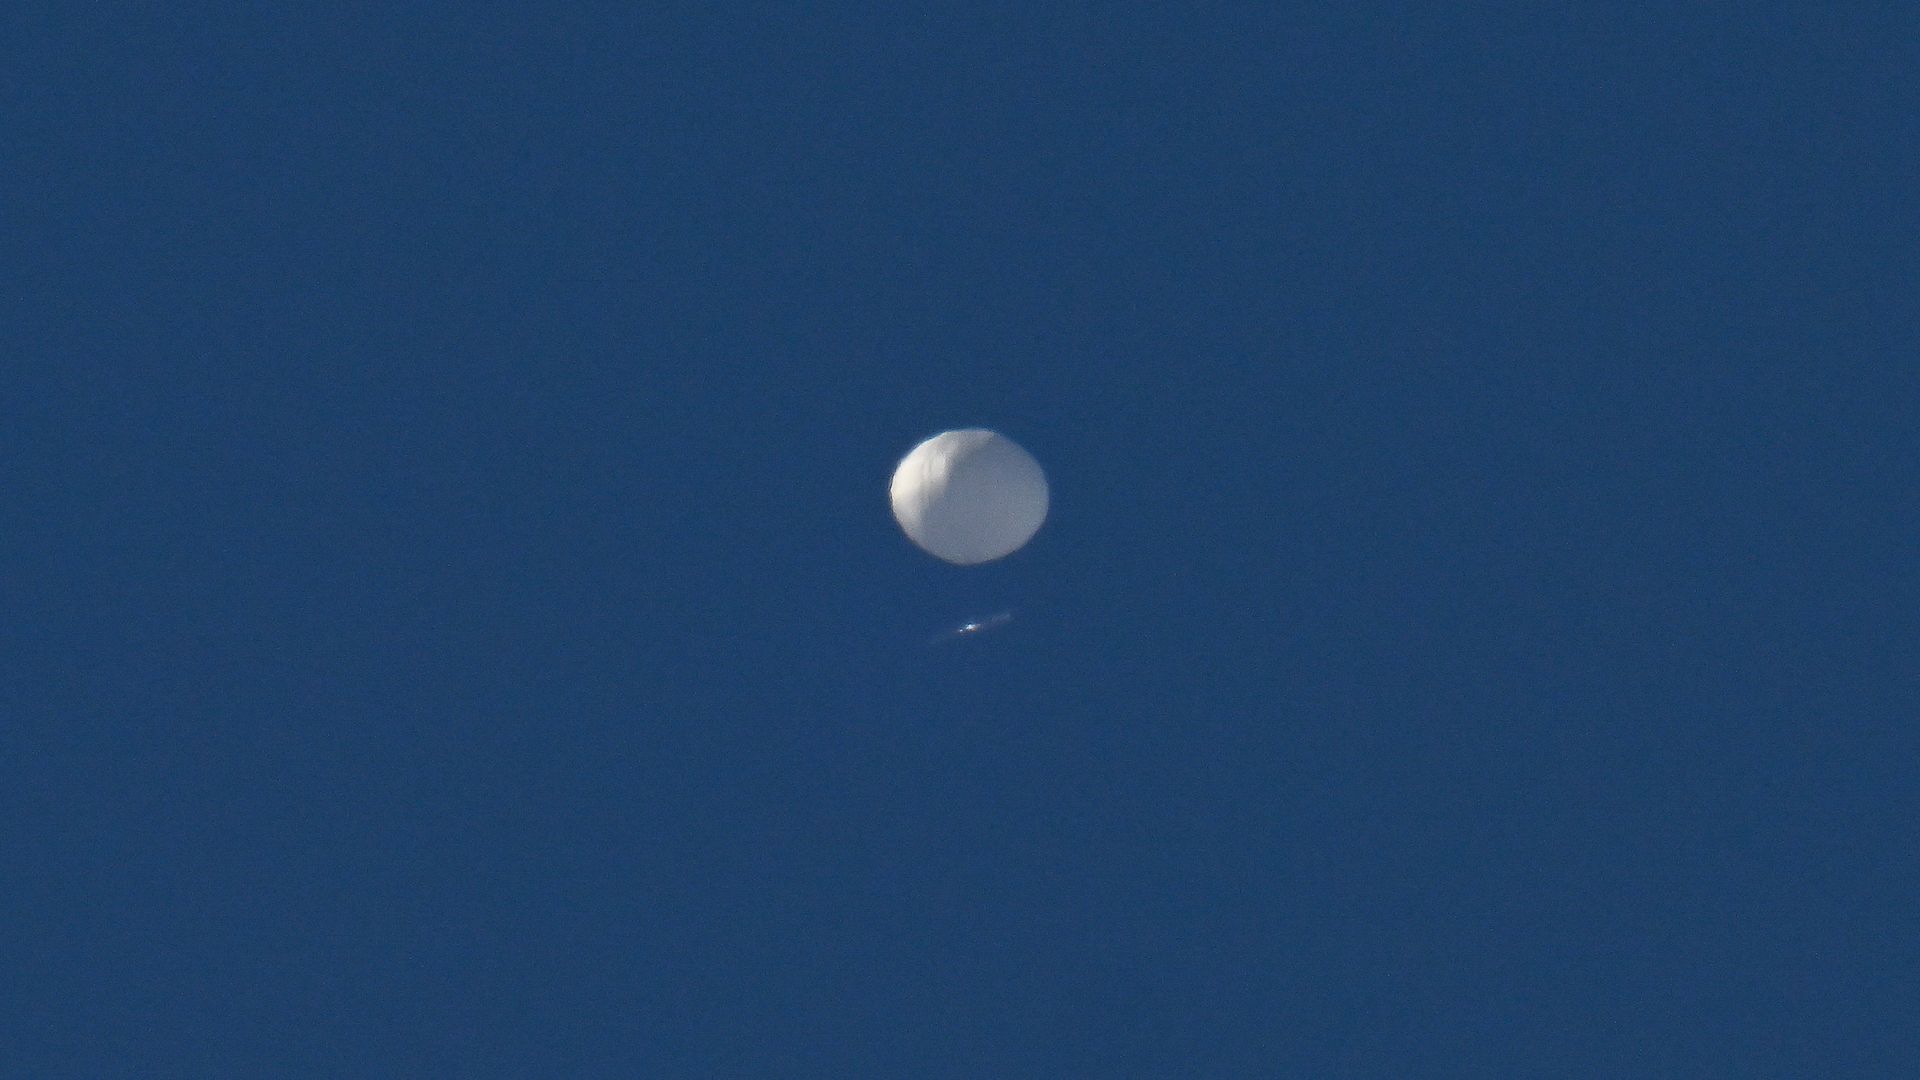 The weather balloon against a blue sky